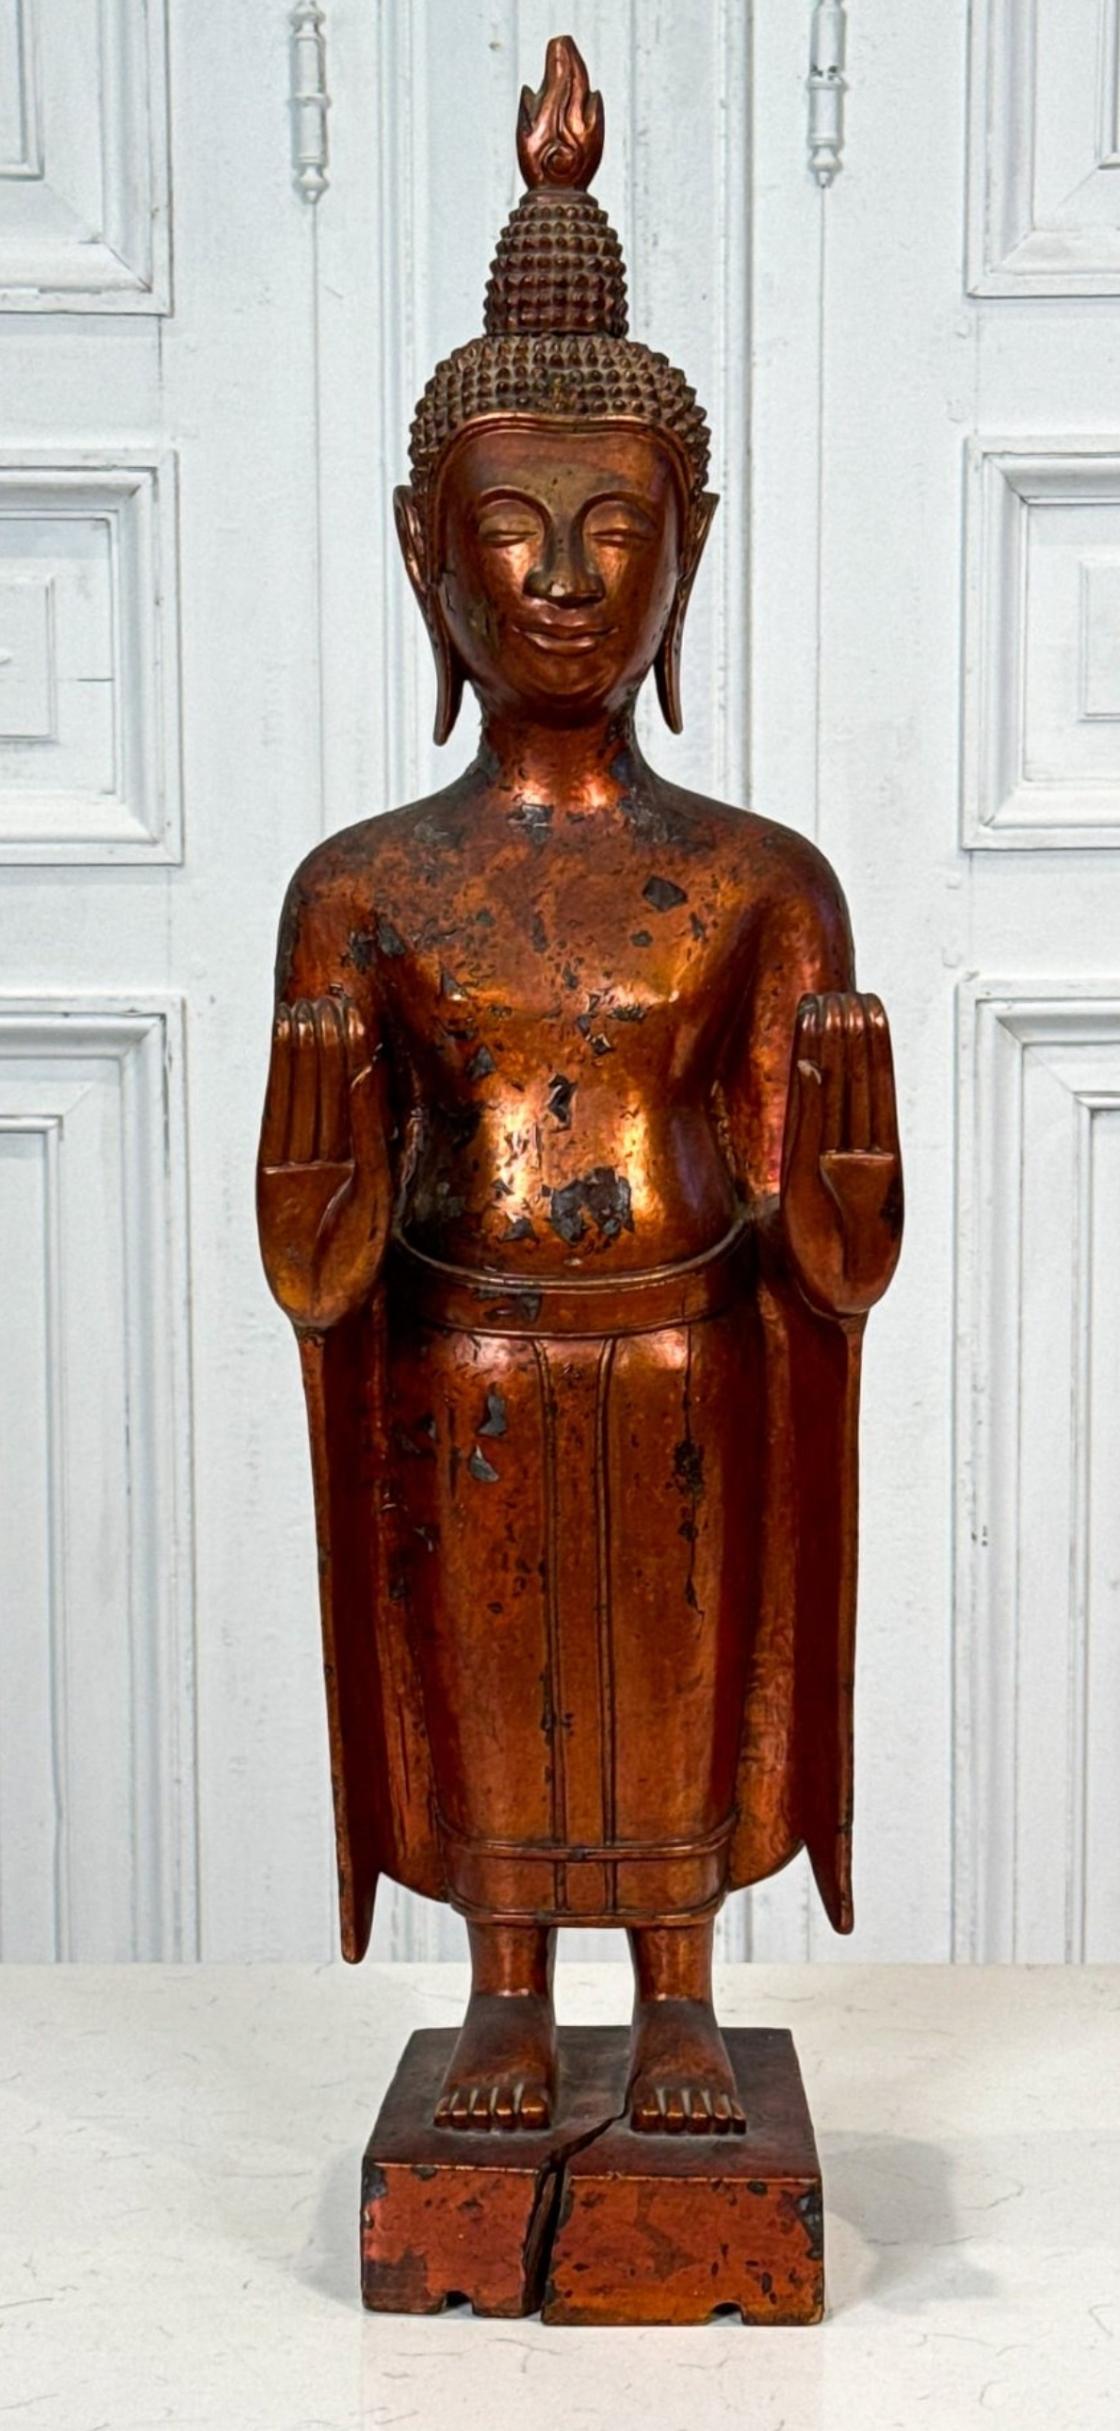 A beautiful antique Khmer hand carved wooden Buddhist figure.

Originating in Cambodia, Laos, Vietnam or Thailand, 19th century or earlier, the exceptional Southeast Asian antique religious sculpture depicting Buddha in standing pose with both hands